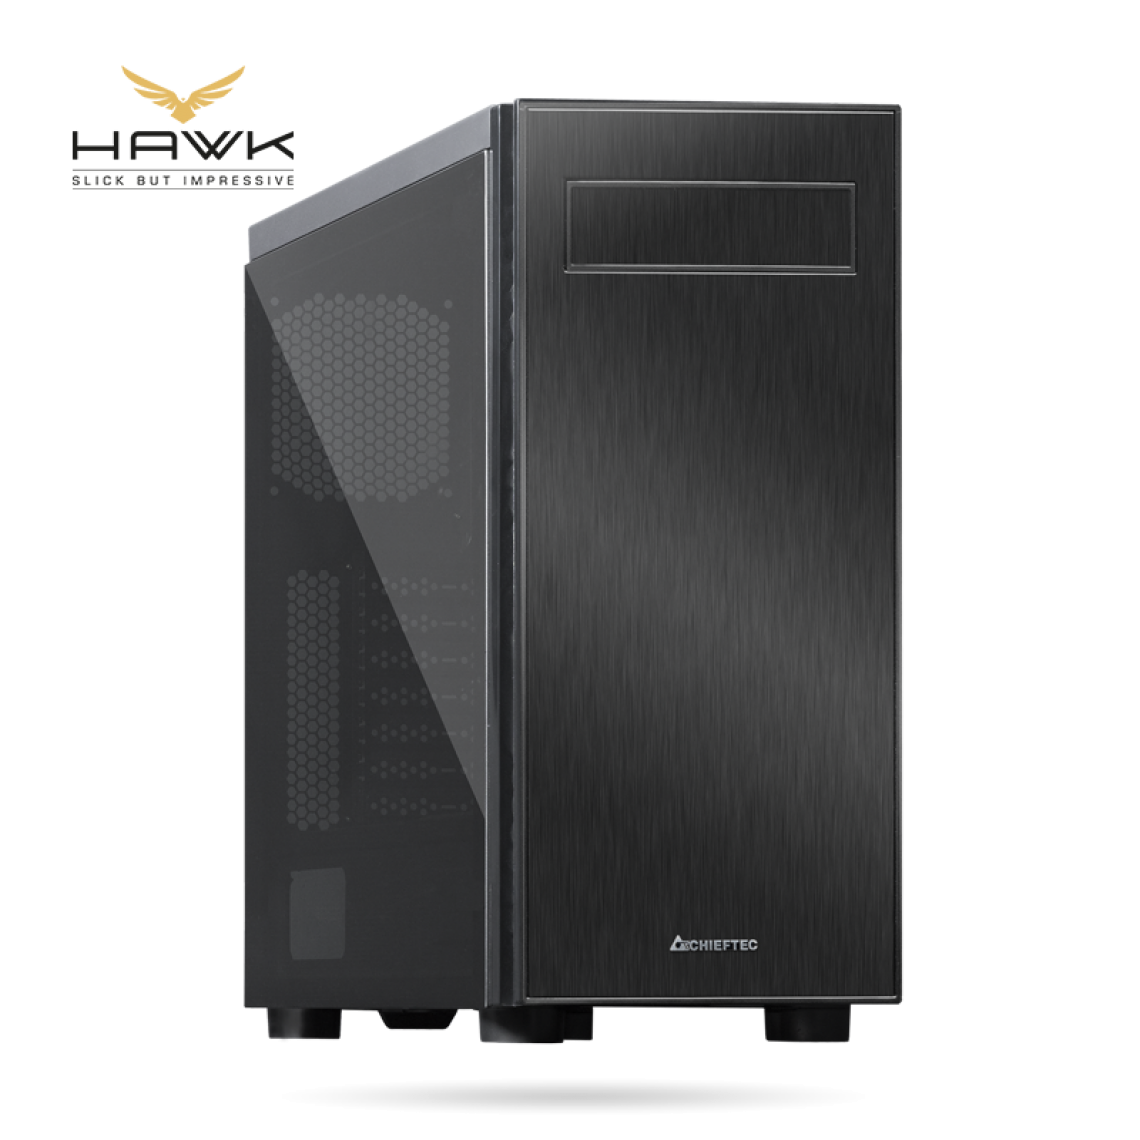 Chieftec - Hawk Gaming ATX tower Hawk Gaming ATX tower side tempered glass - Boitier PC